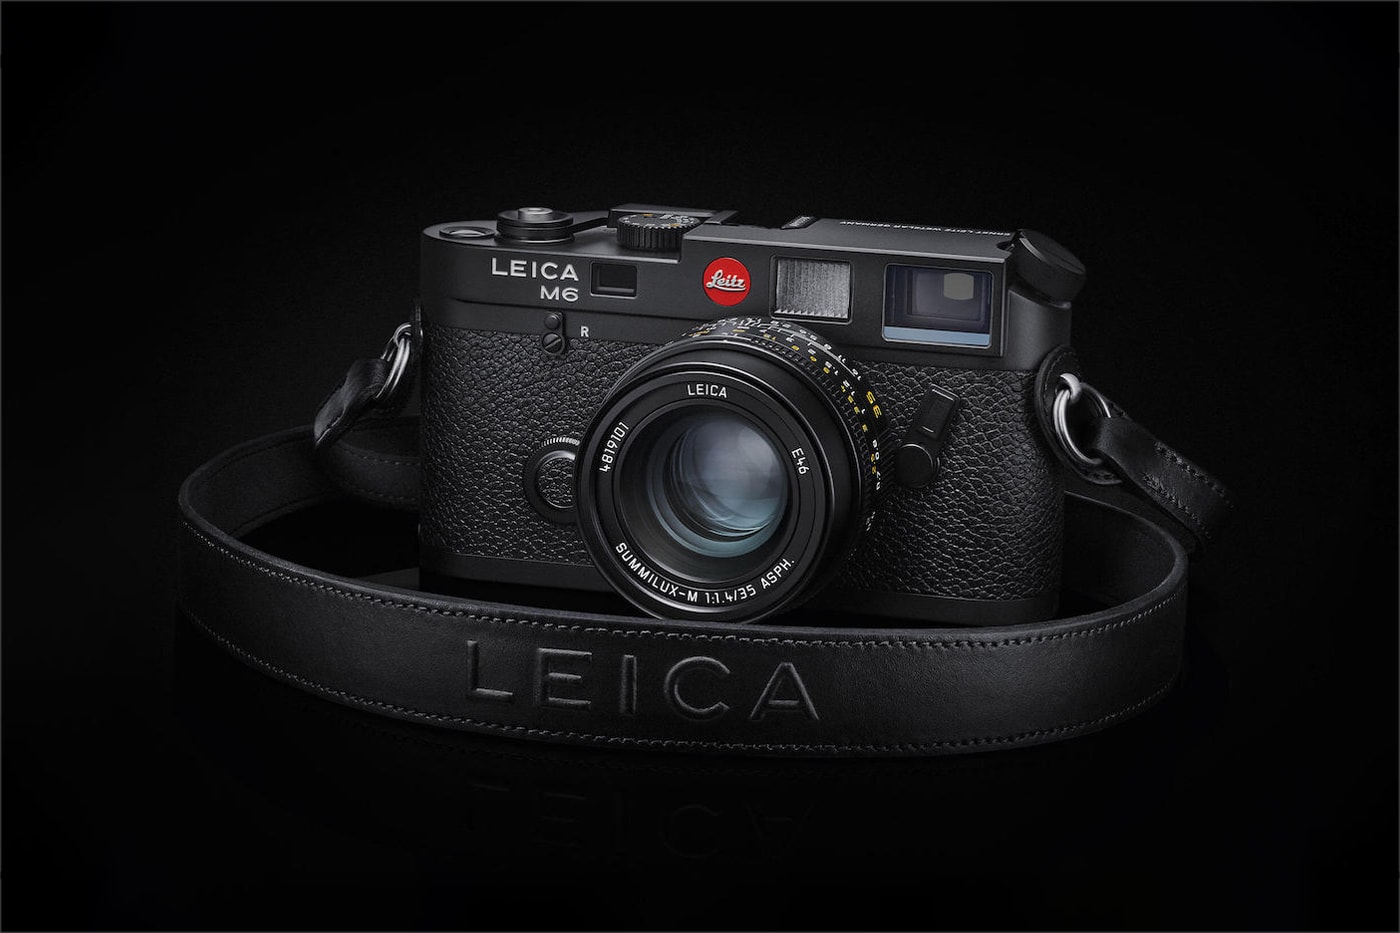 Review of the The Leica M6 Film camera & 35mm Summicron – the timeless  Classical beauty with samples. – KeithWee